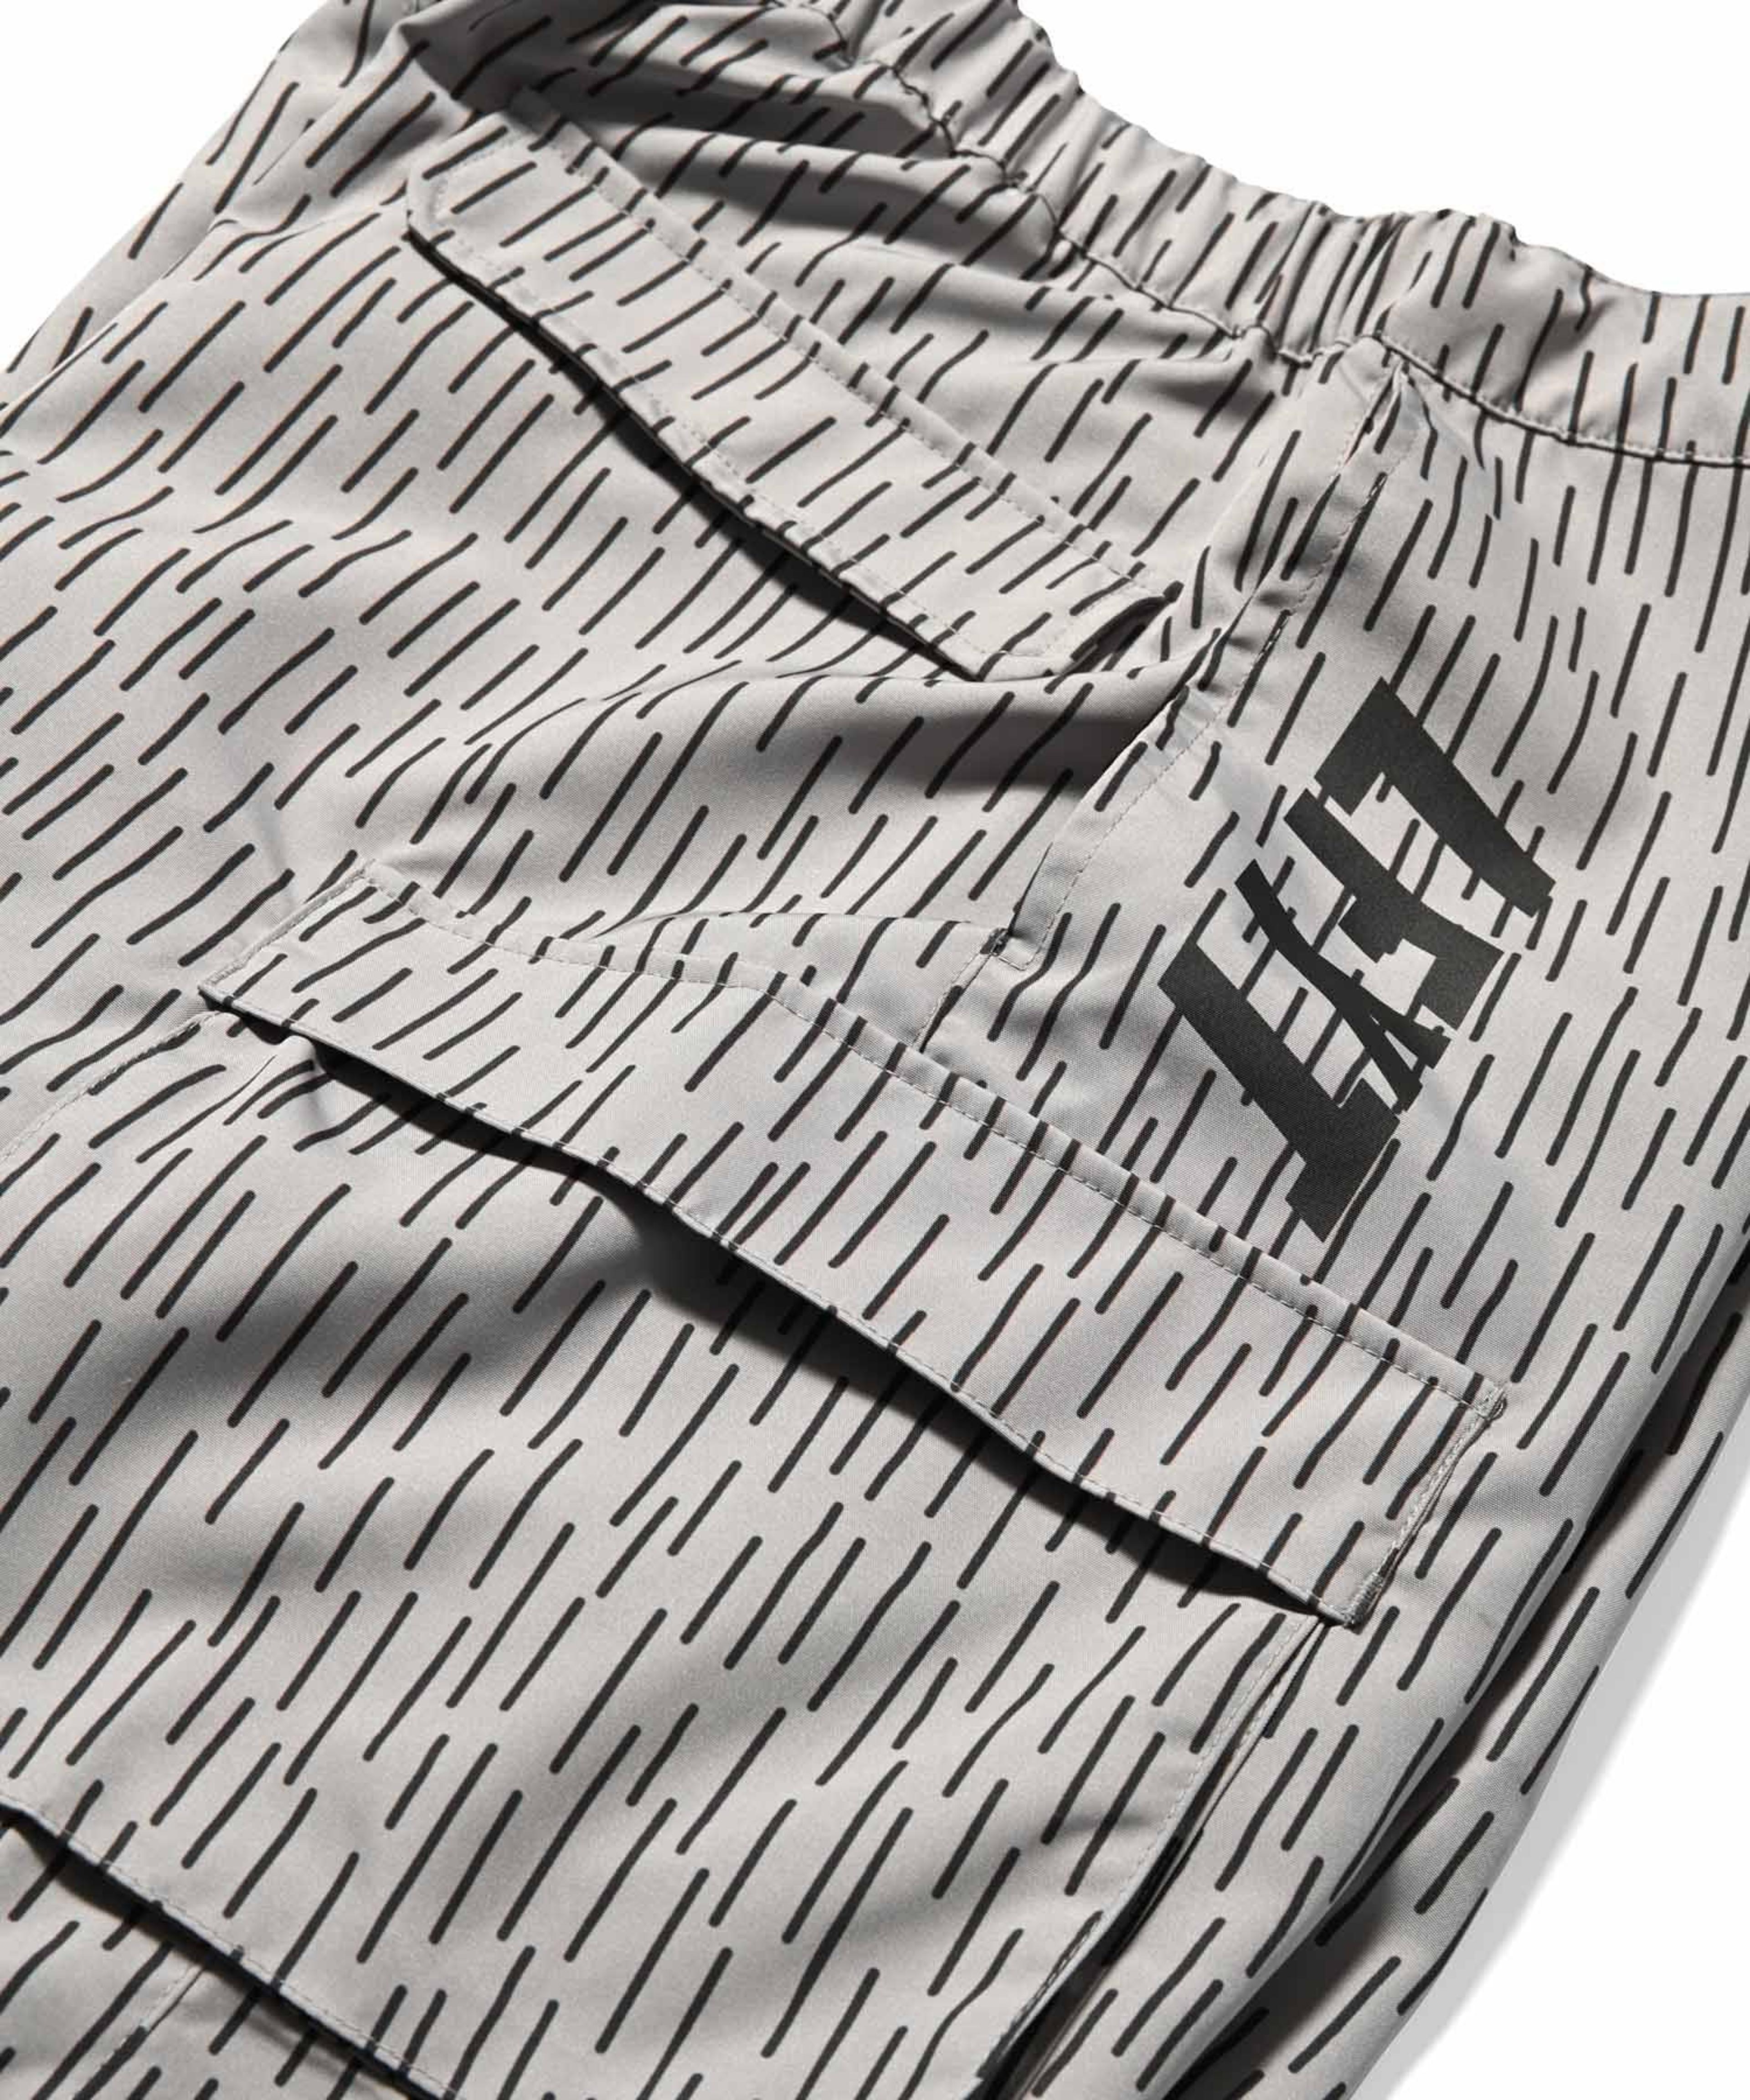 Alternate View 20 of LFYT - TACTICAL CARGO SHORTS LS241301